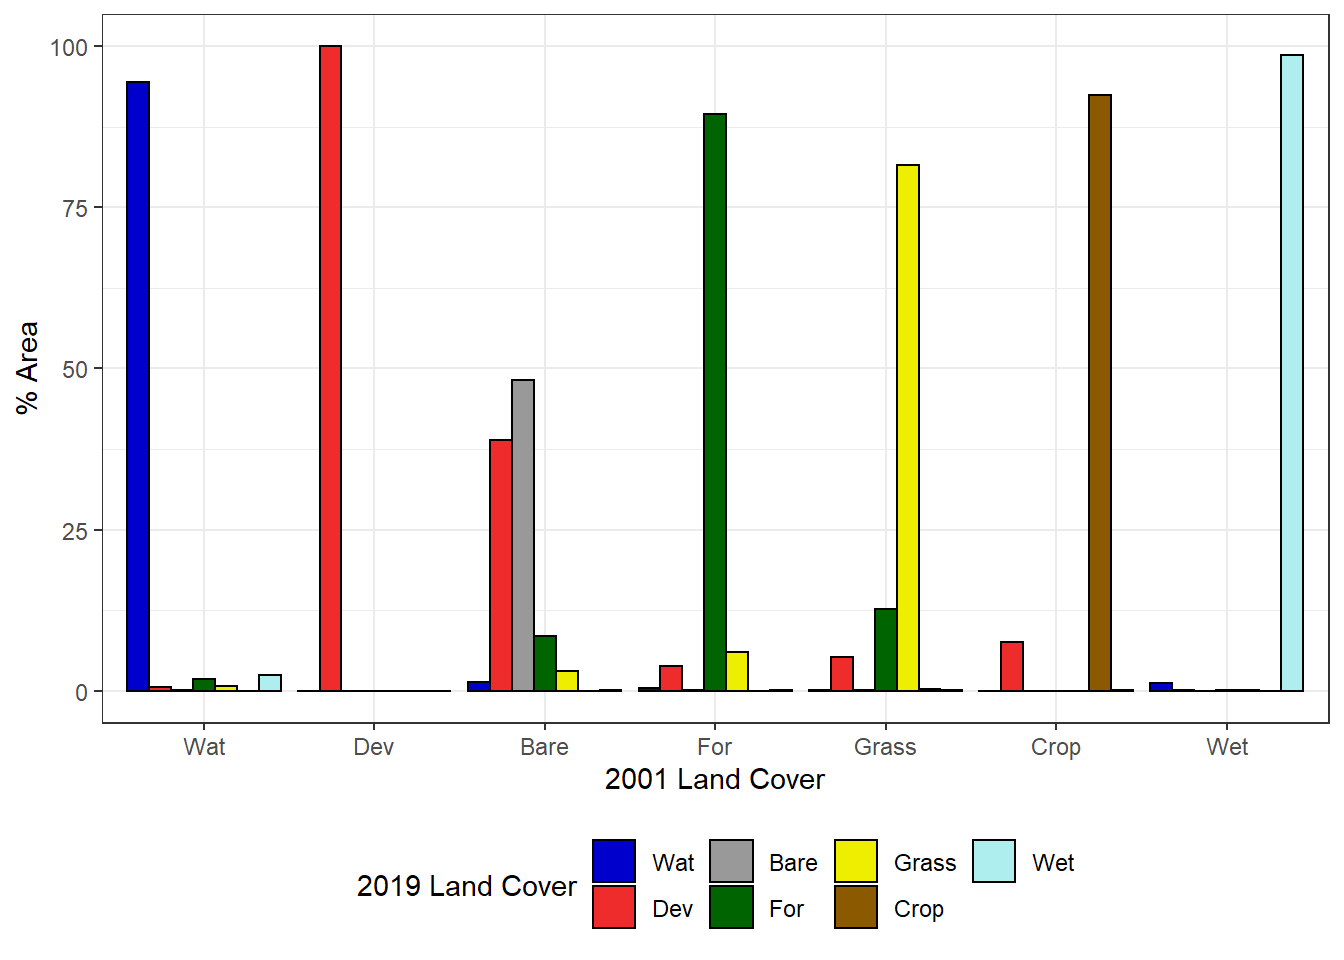 Percentage of each 2001 land cover class changing to each 2019 land cover class.